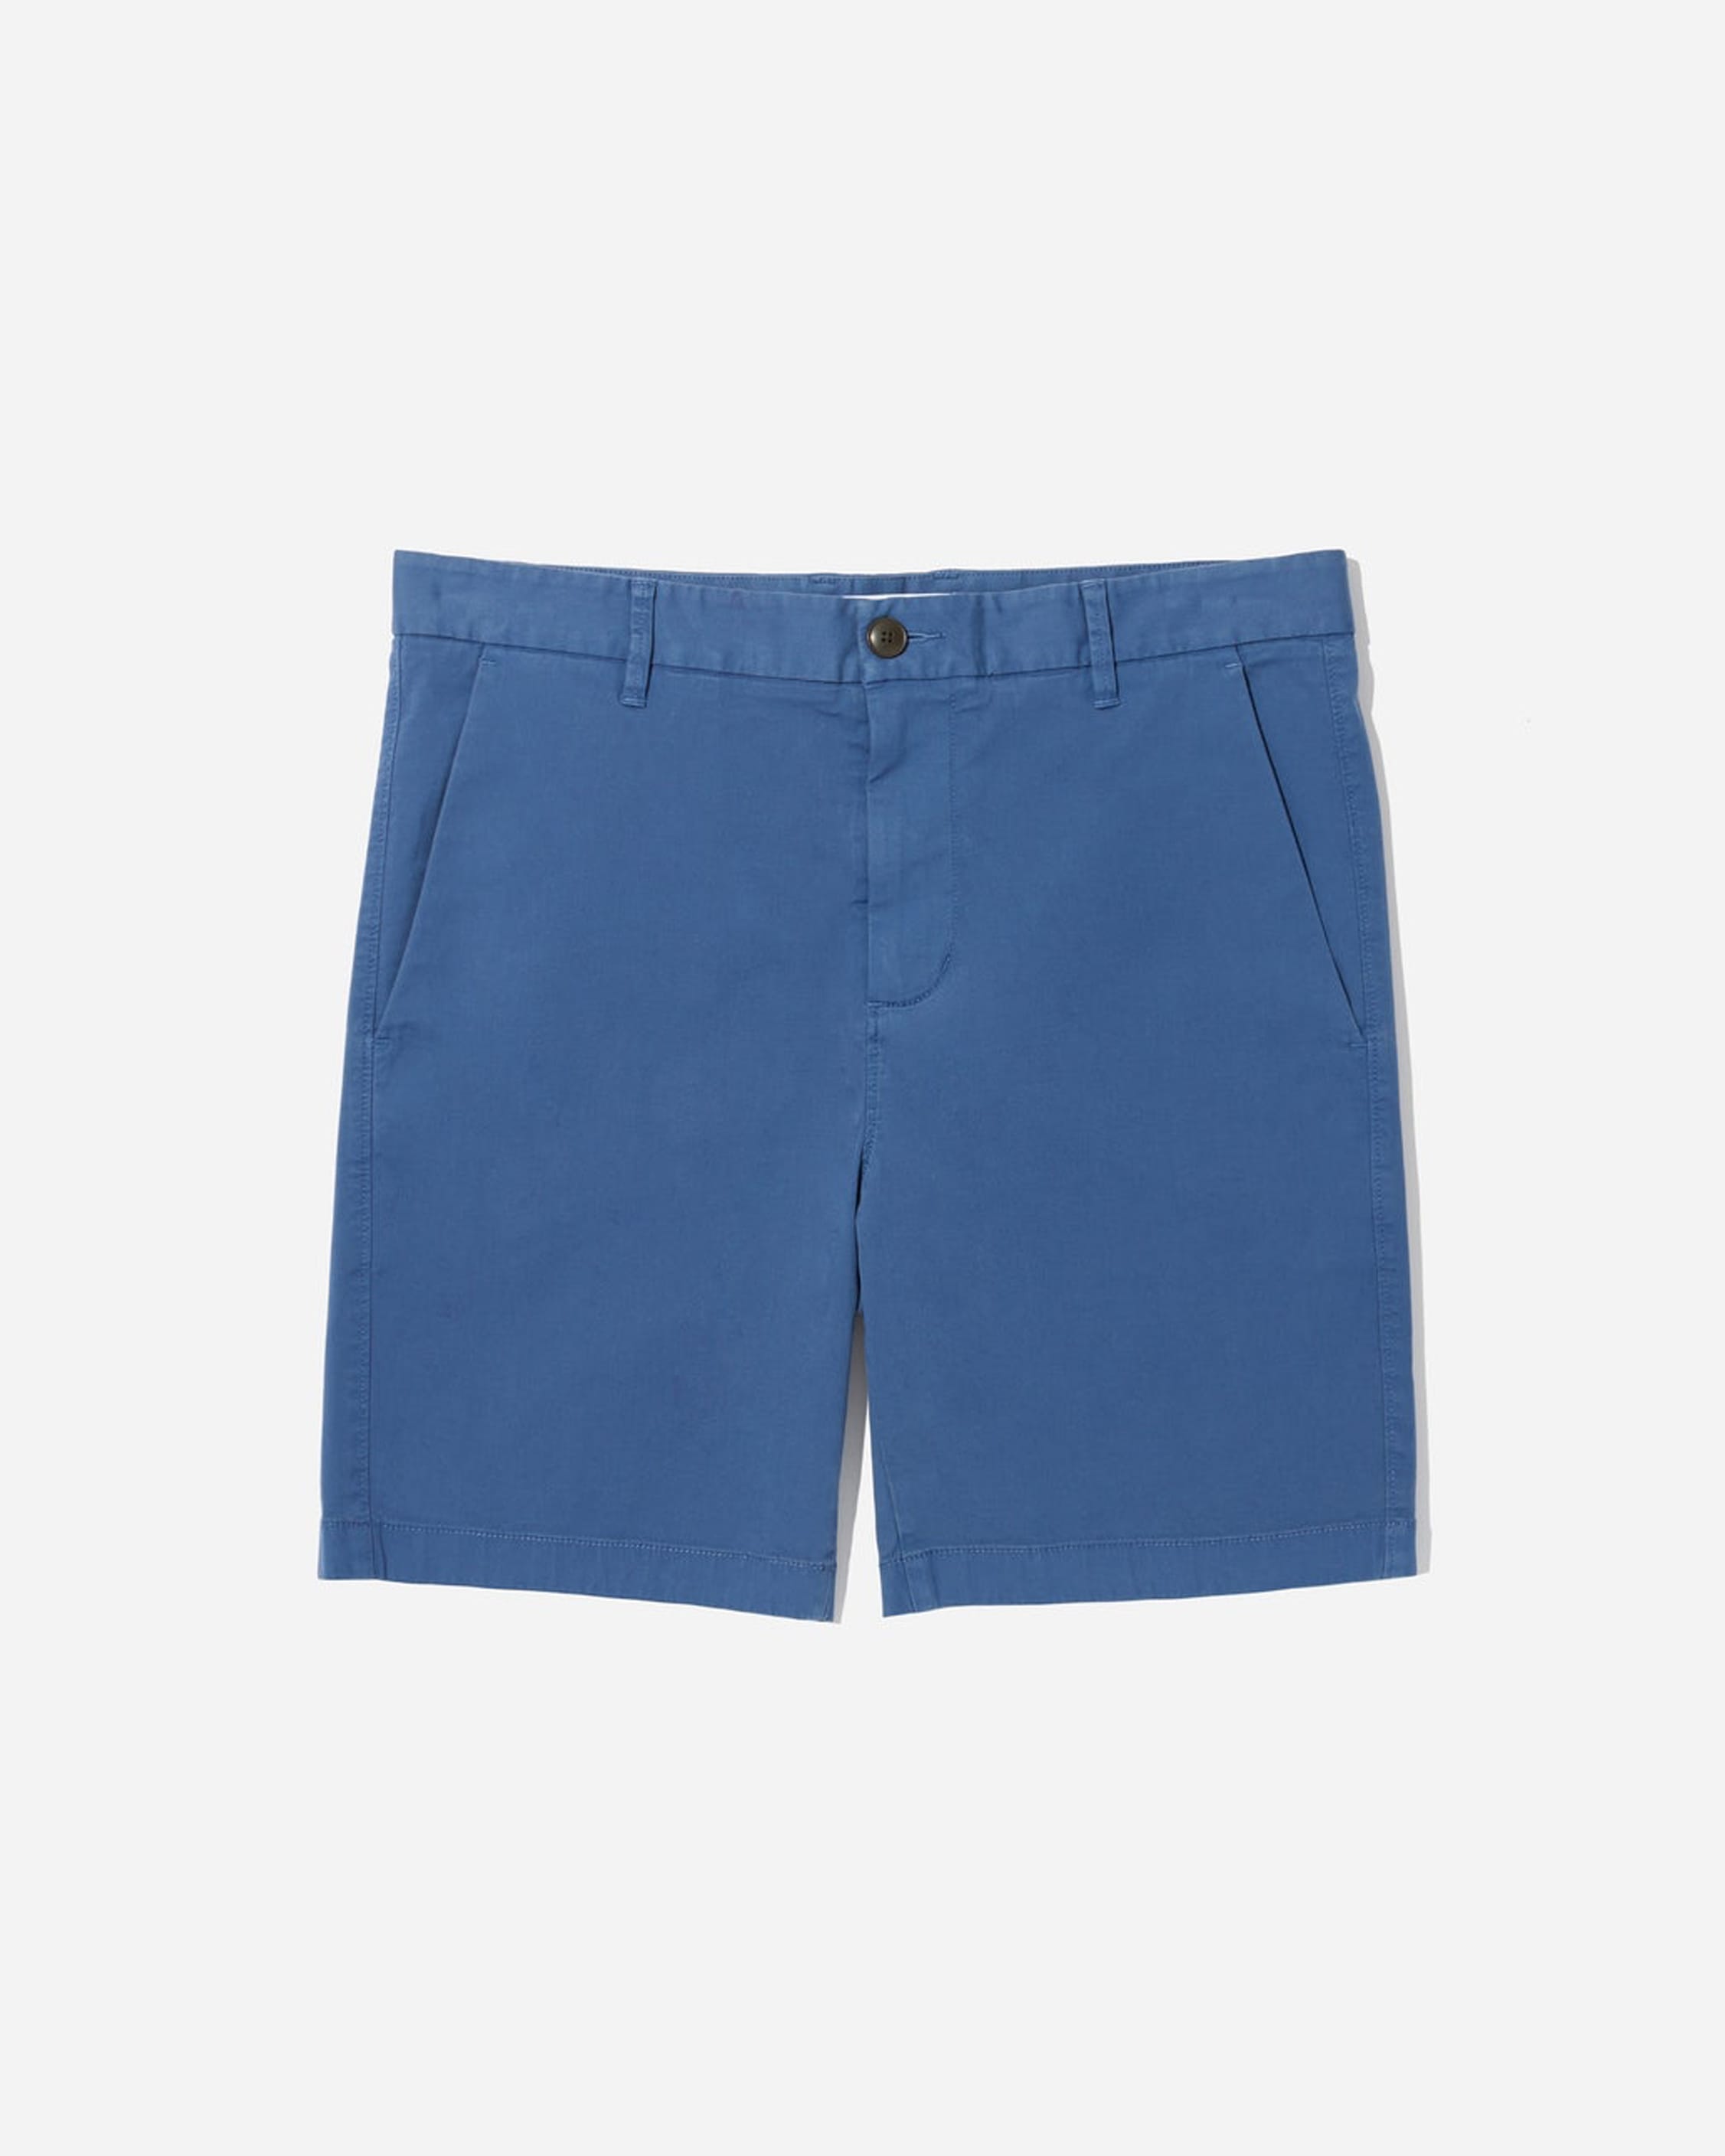 The Midweight Chino 7